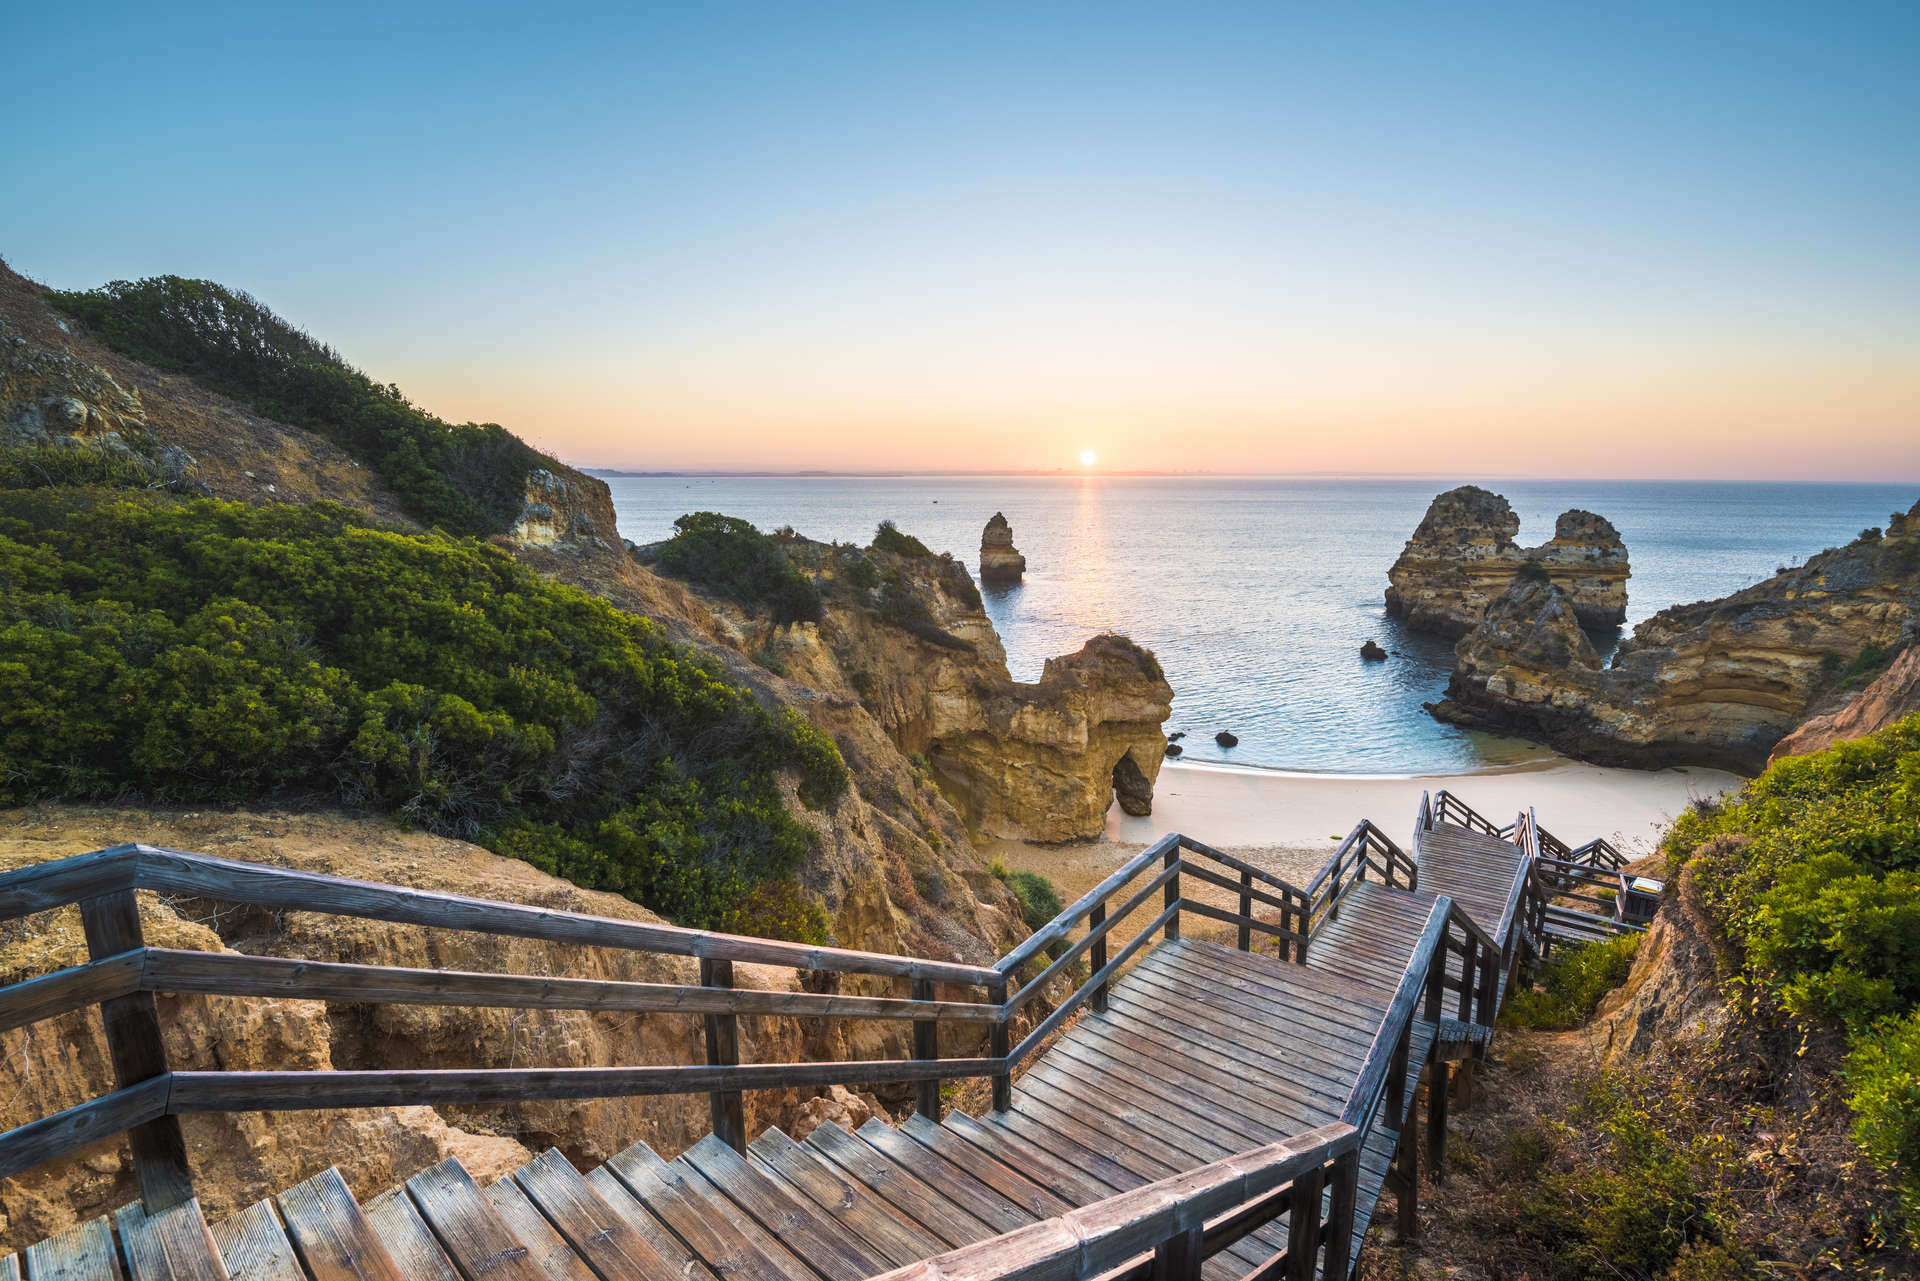 The Algarve has some of Portugal's best beaches